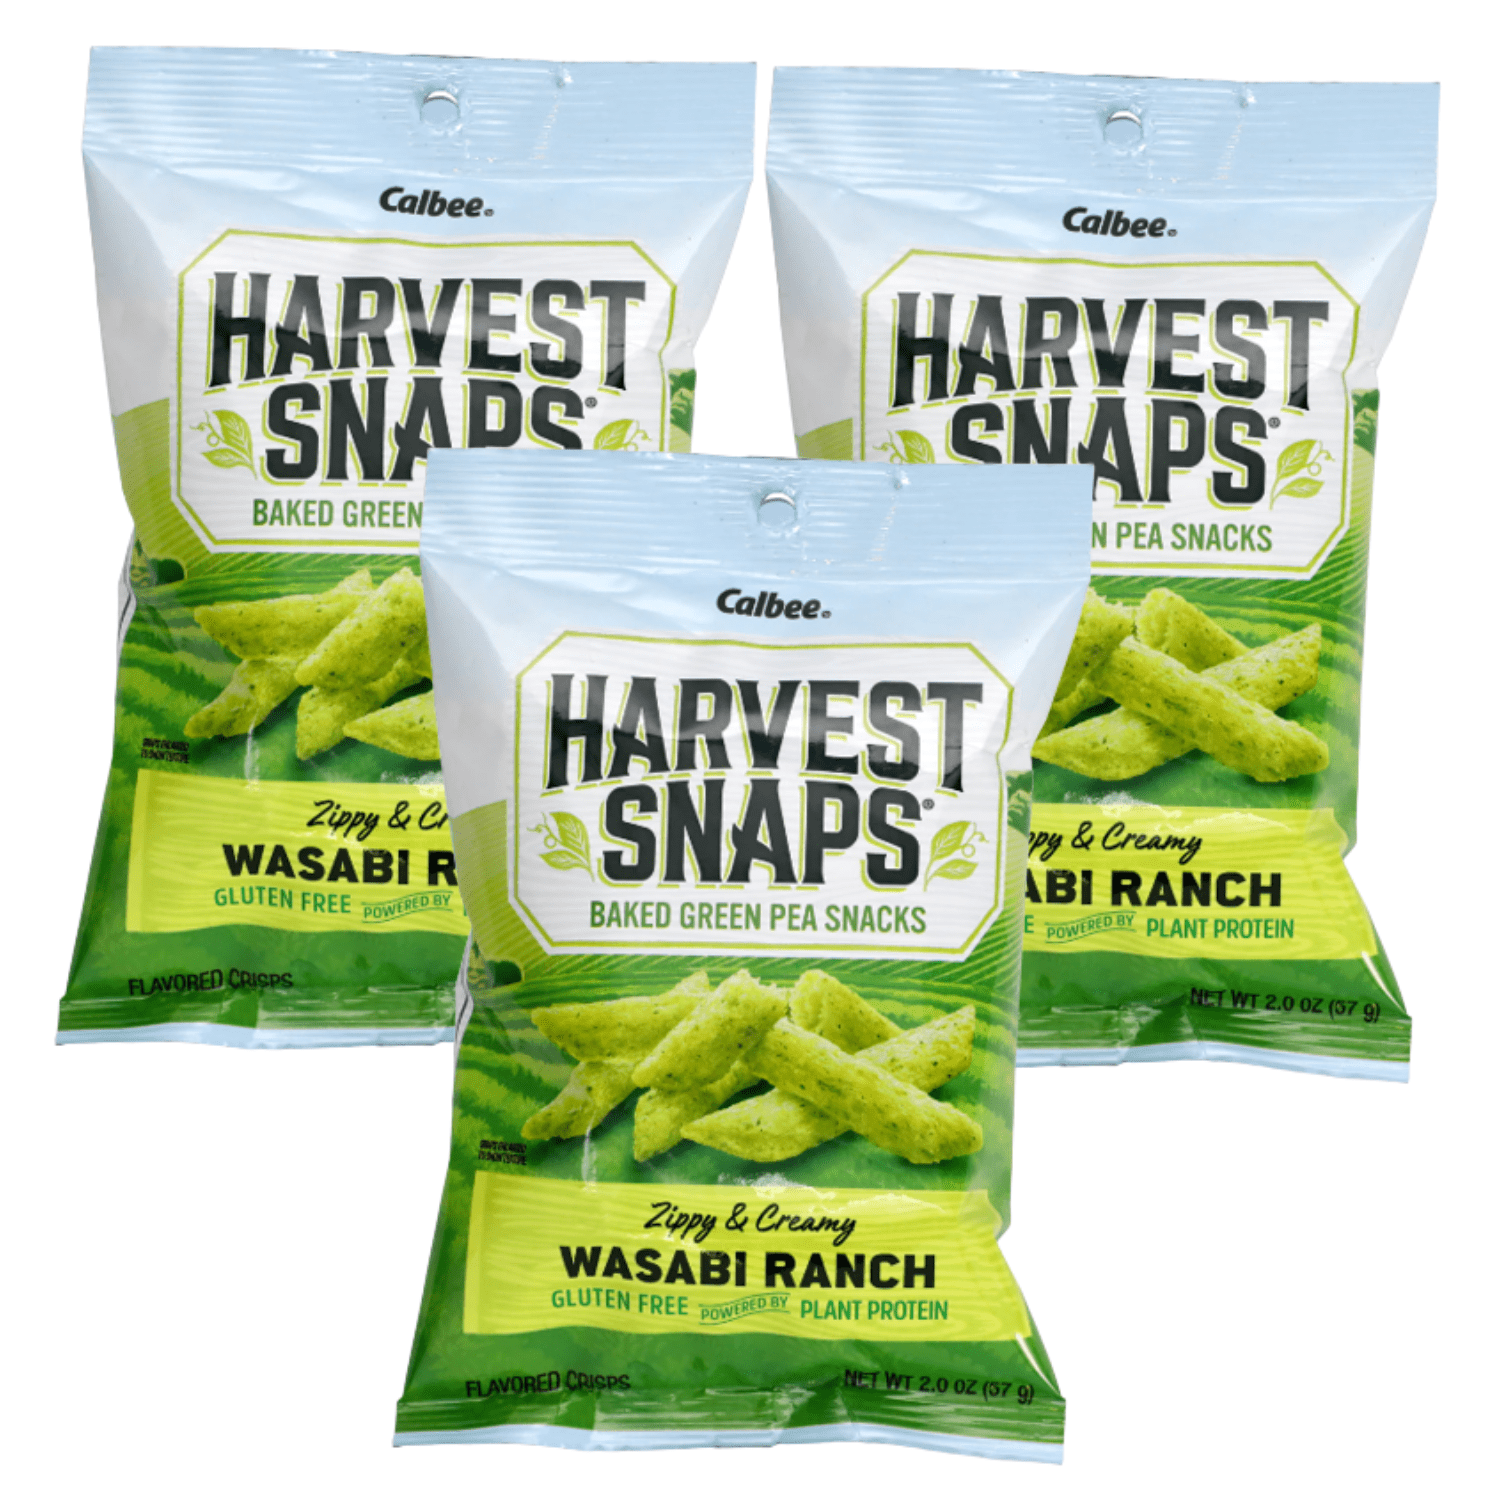 Harvest Snaps Baked Green Pea Snacks Zippy and Creamy Wasabi Ranch Gluten Free Plant Protein Flavored Crisp Party Snack Gifts on Birthdays